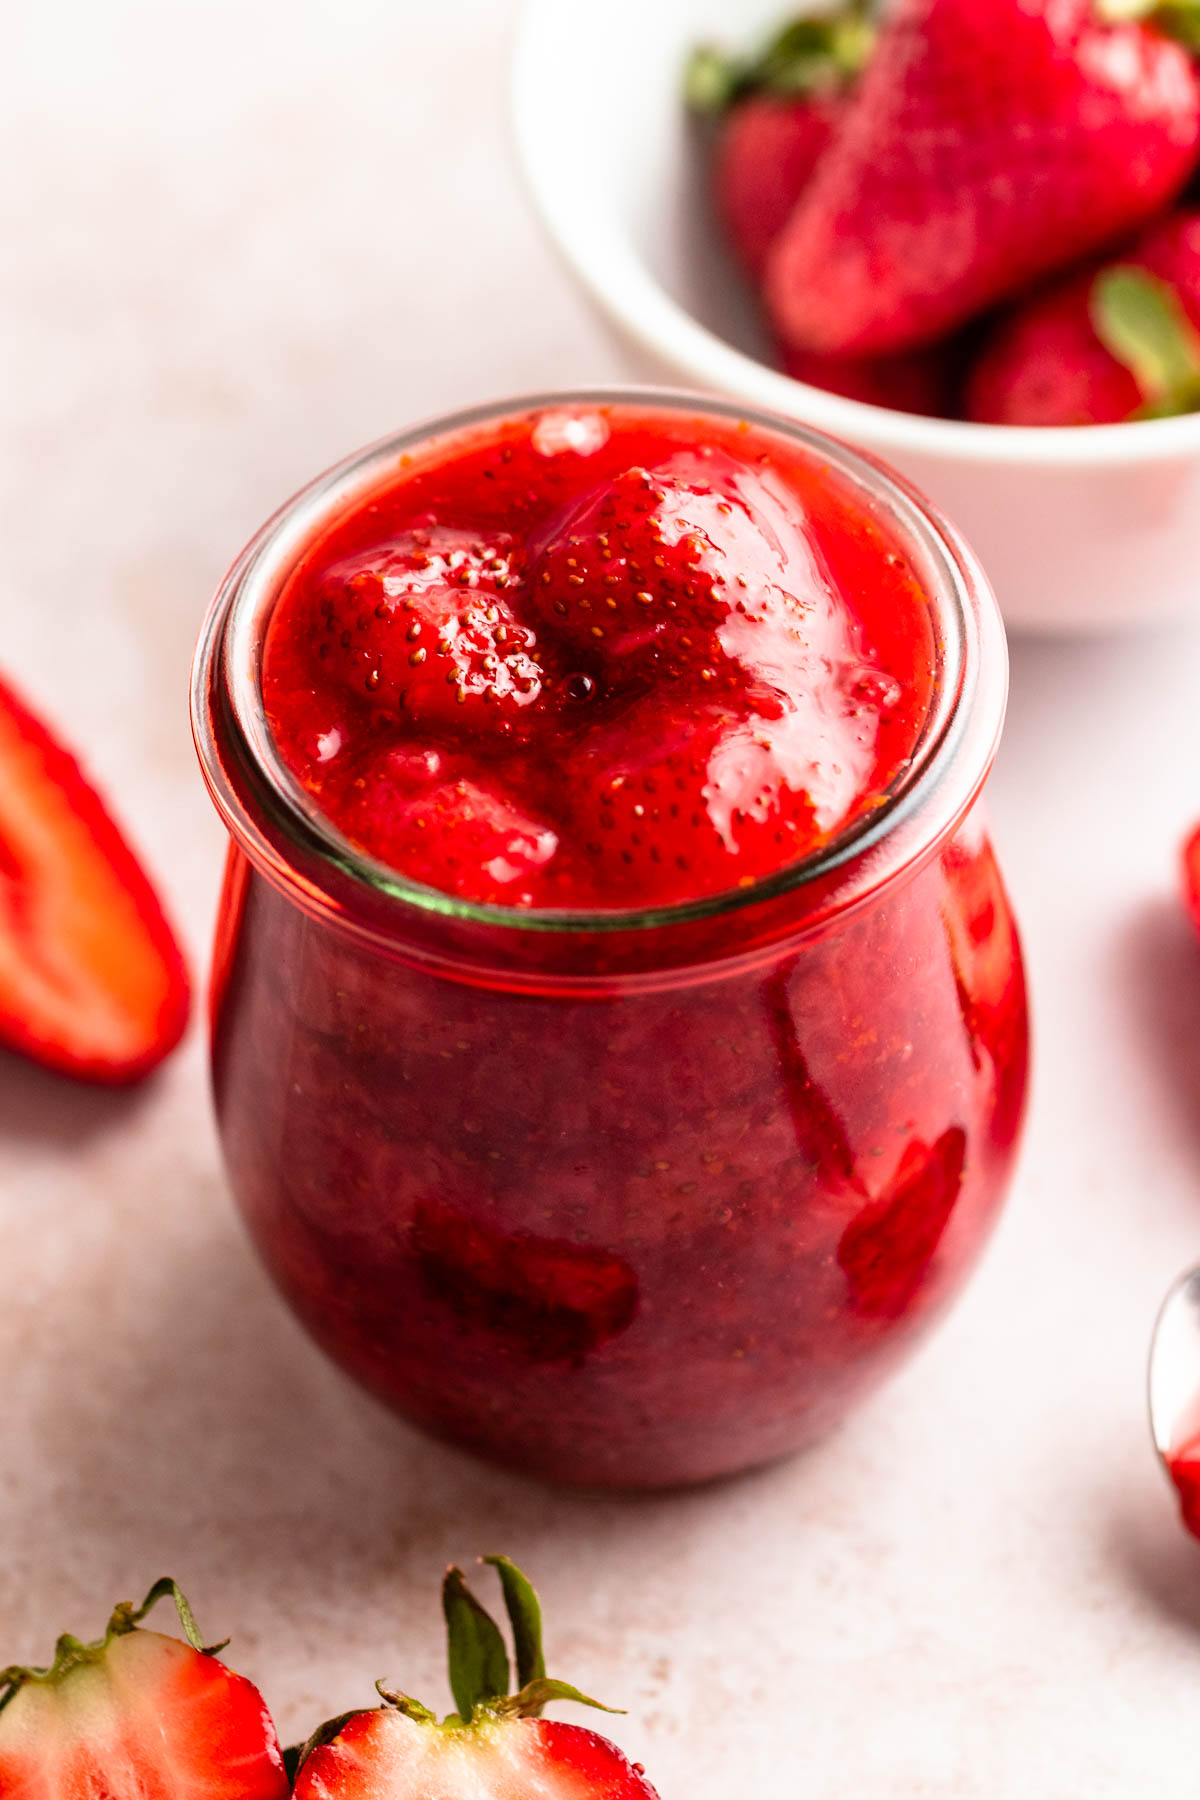 Strawberry compote in a jar.